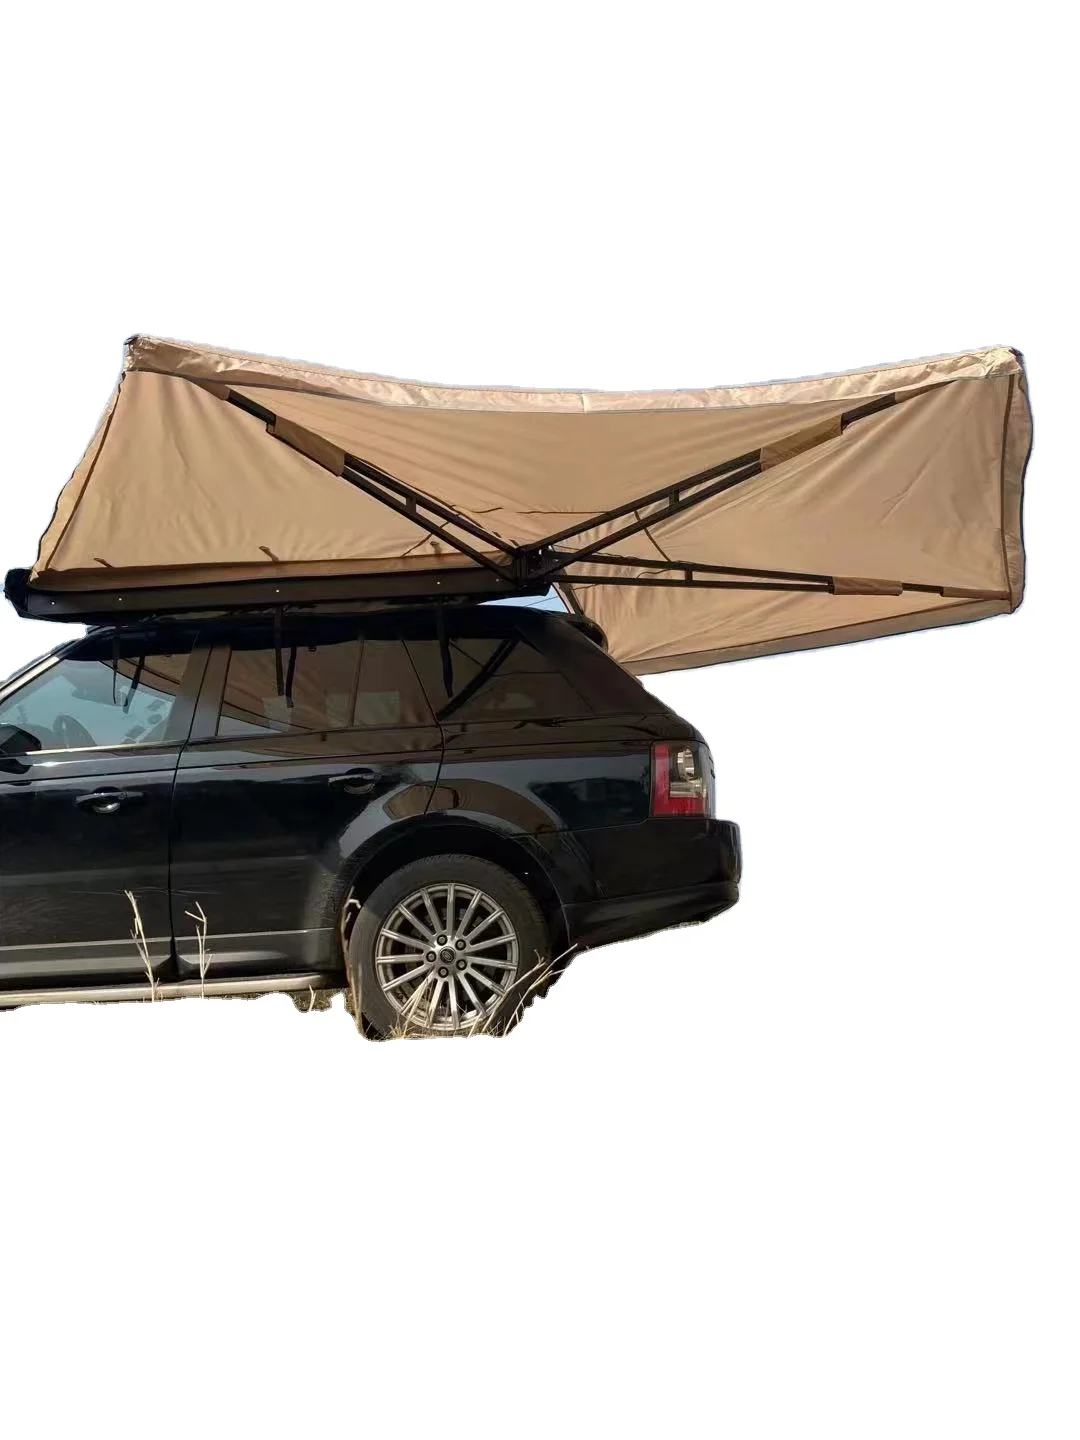 

270 Degree Side Awning with Aluminum Pole 3-4 Person for Camping Outdoor